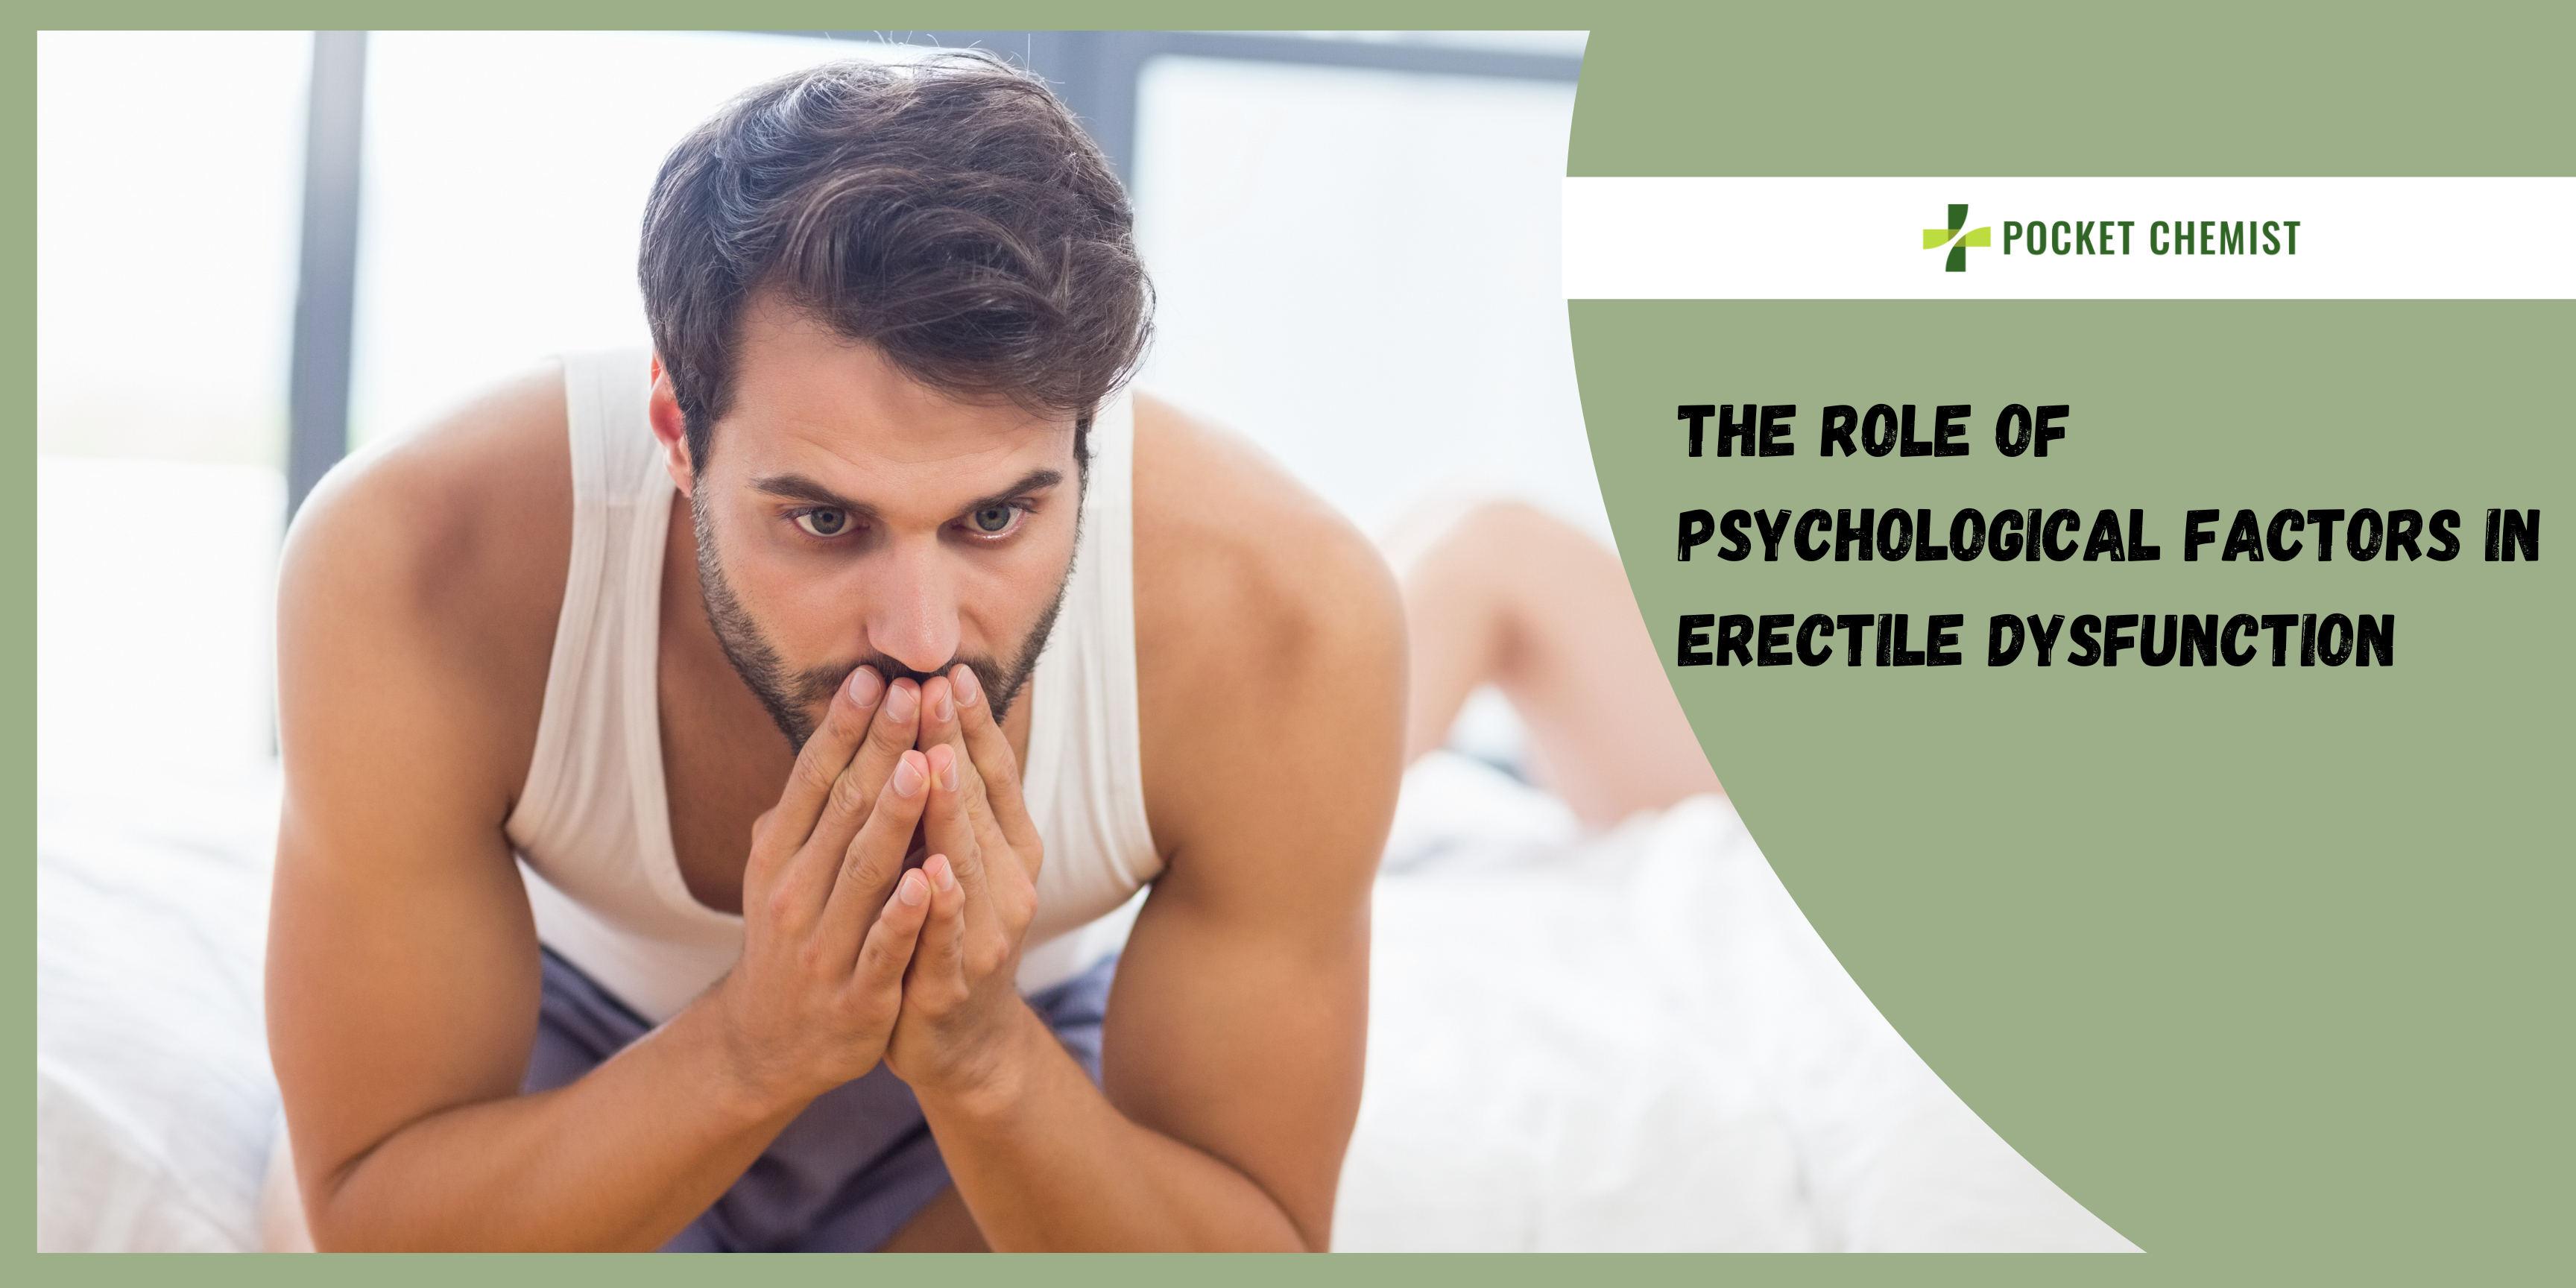 The Role of Psychological Factors in Erectile Dysfunction